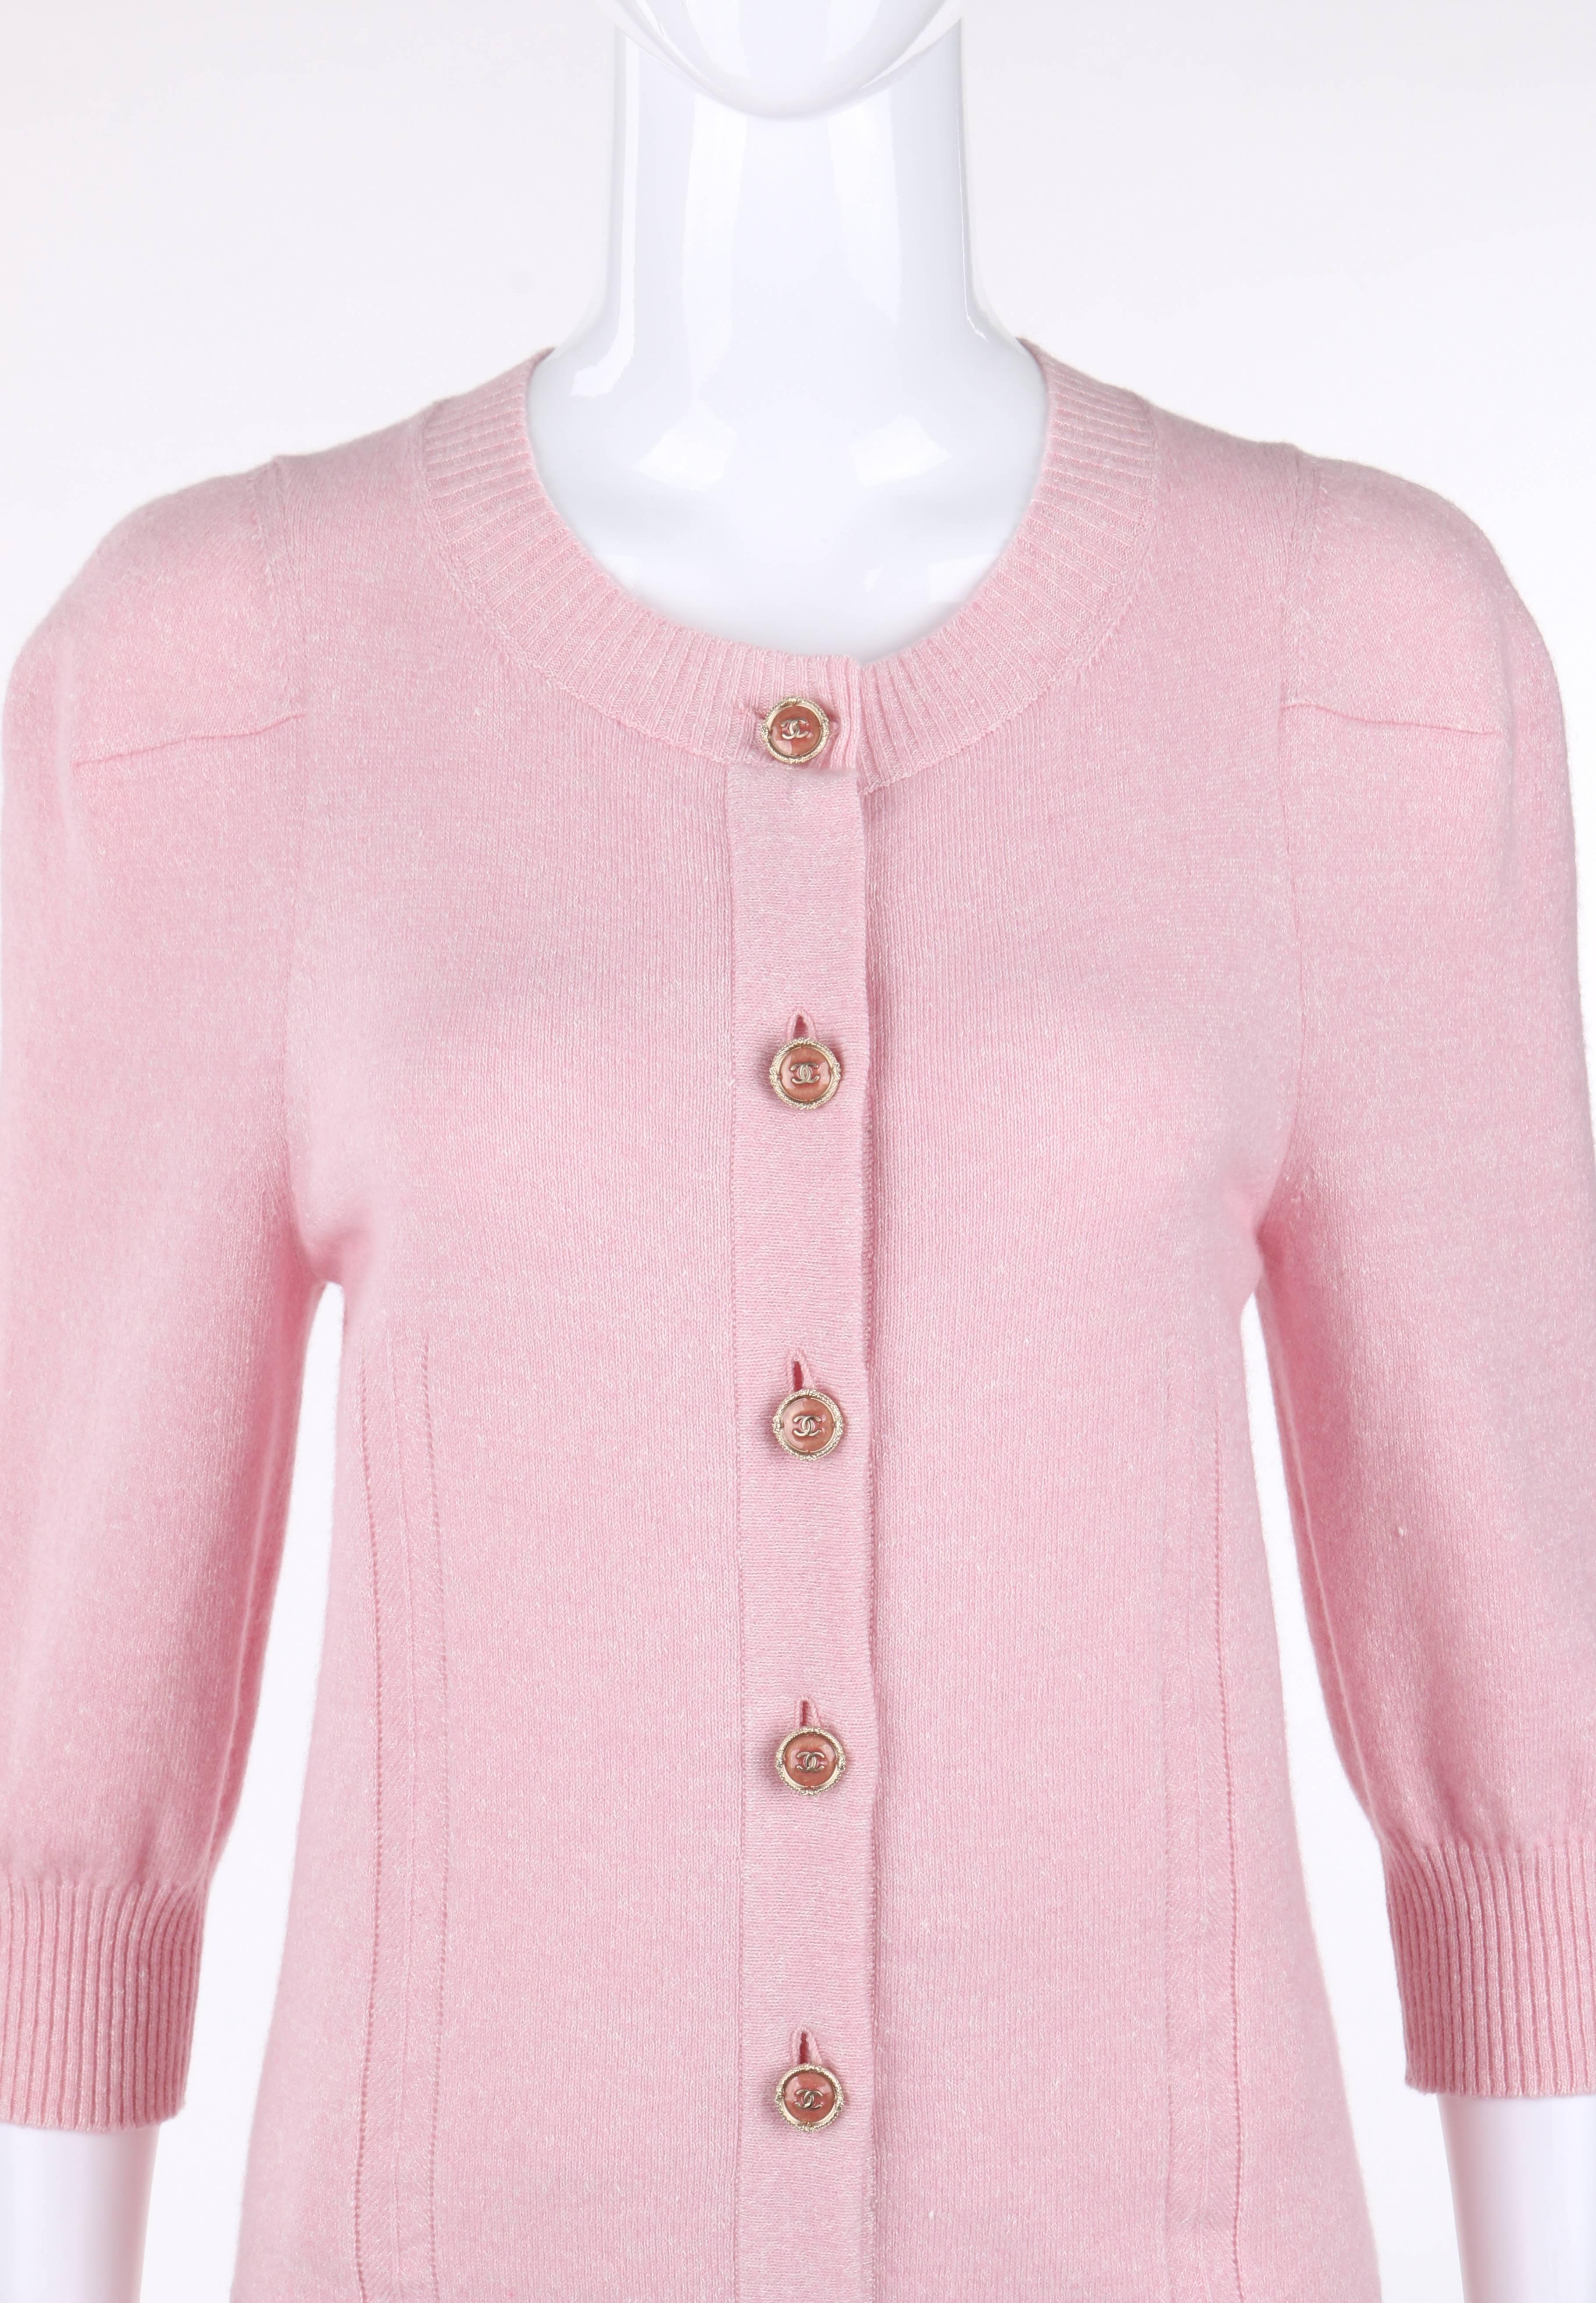 Chanel Resort 2013 pink linen & cashmere blend cardigan knit sweater. Pink and white heathered knit. Scoop neckline. Seven center front pink and gold-toned CC button closures. Front and back herringbone single stripe detail. 3/4 length sleeves. Rib